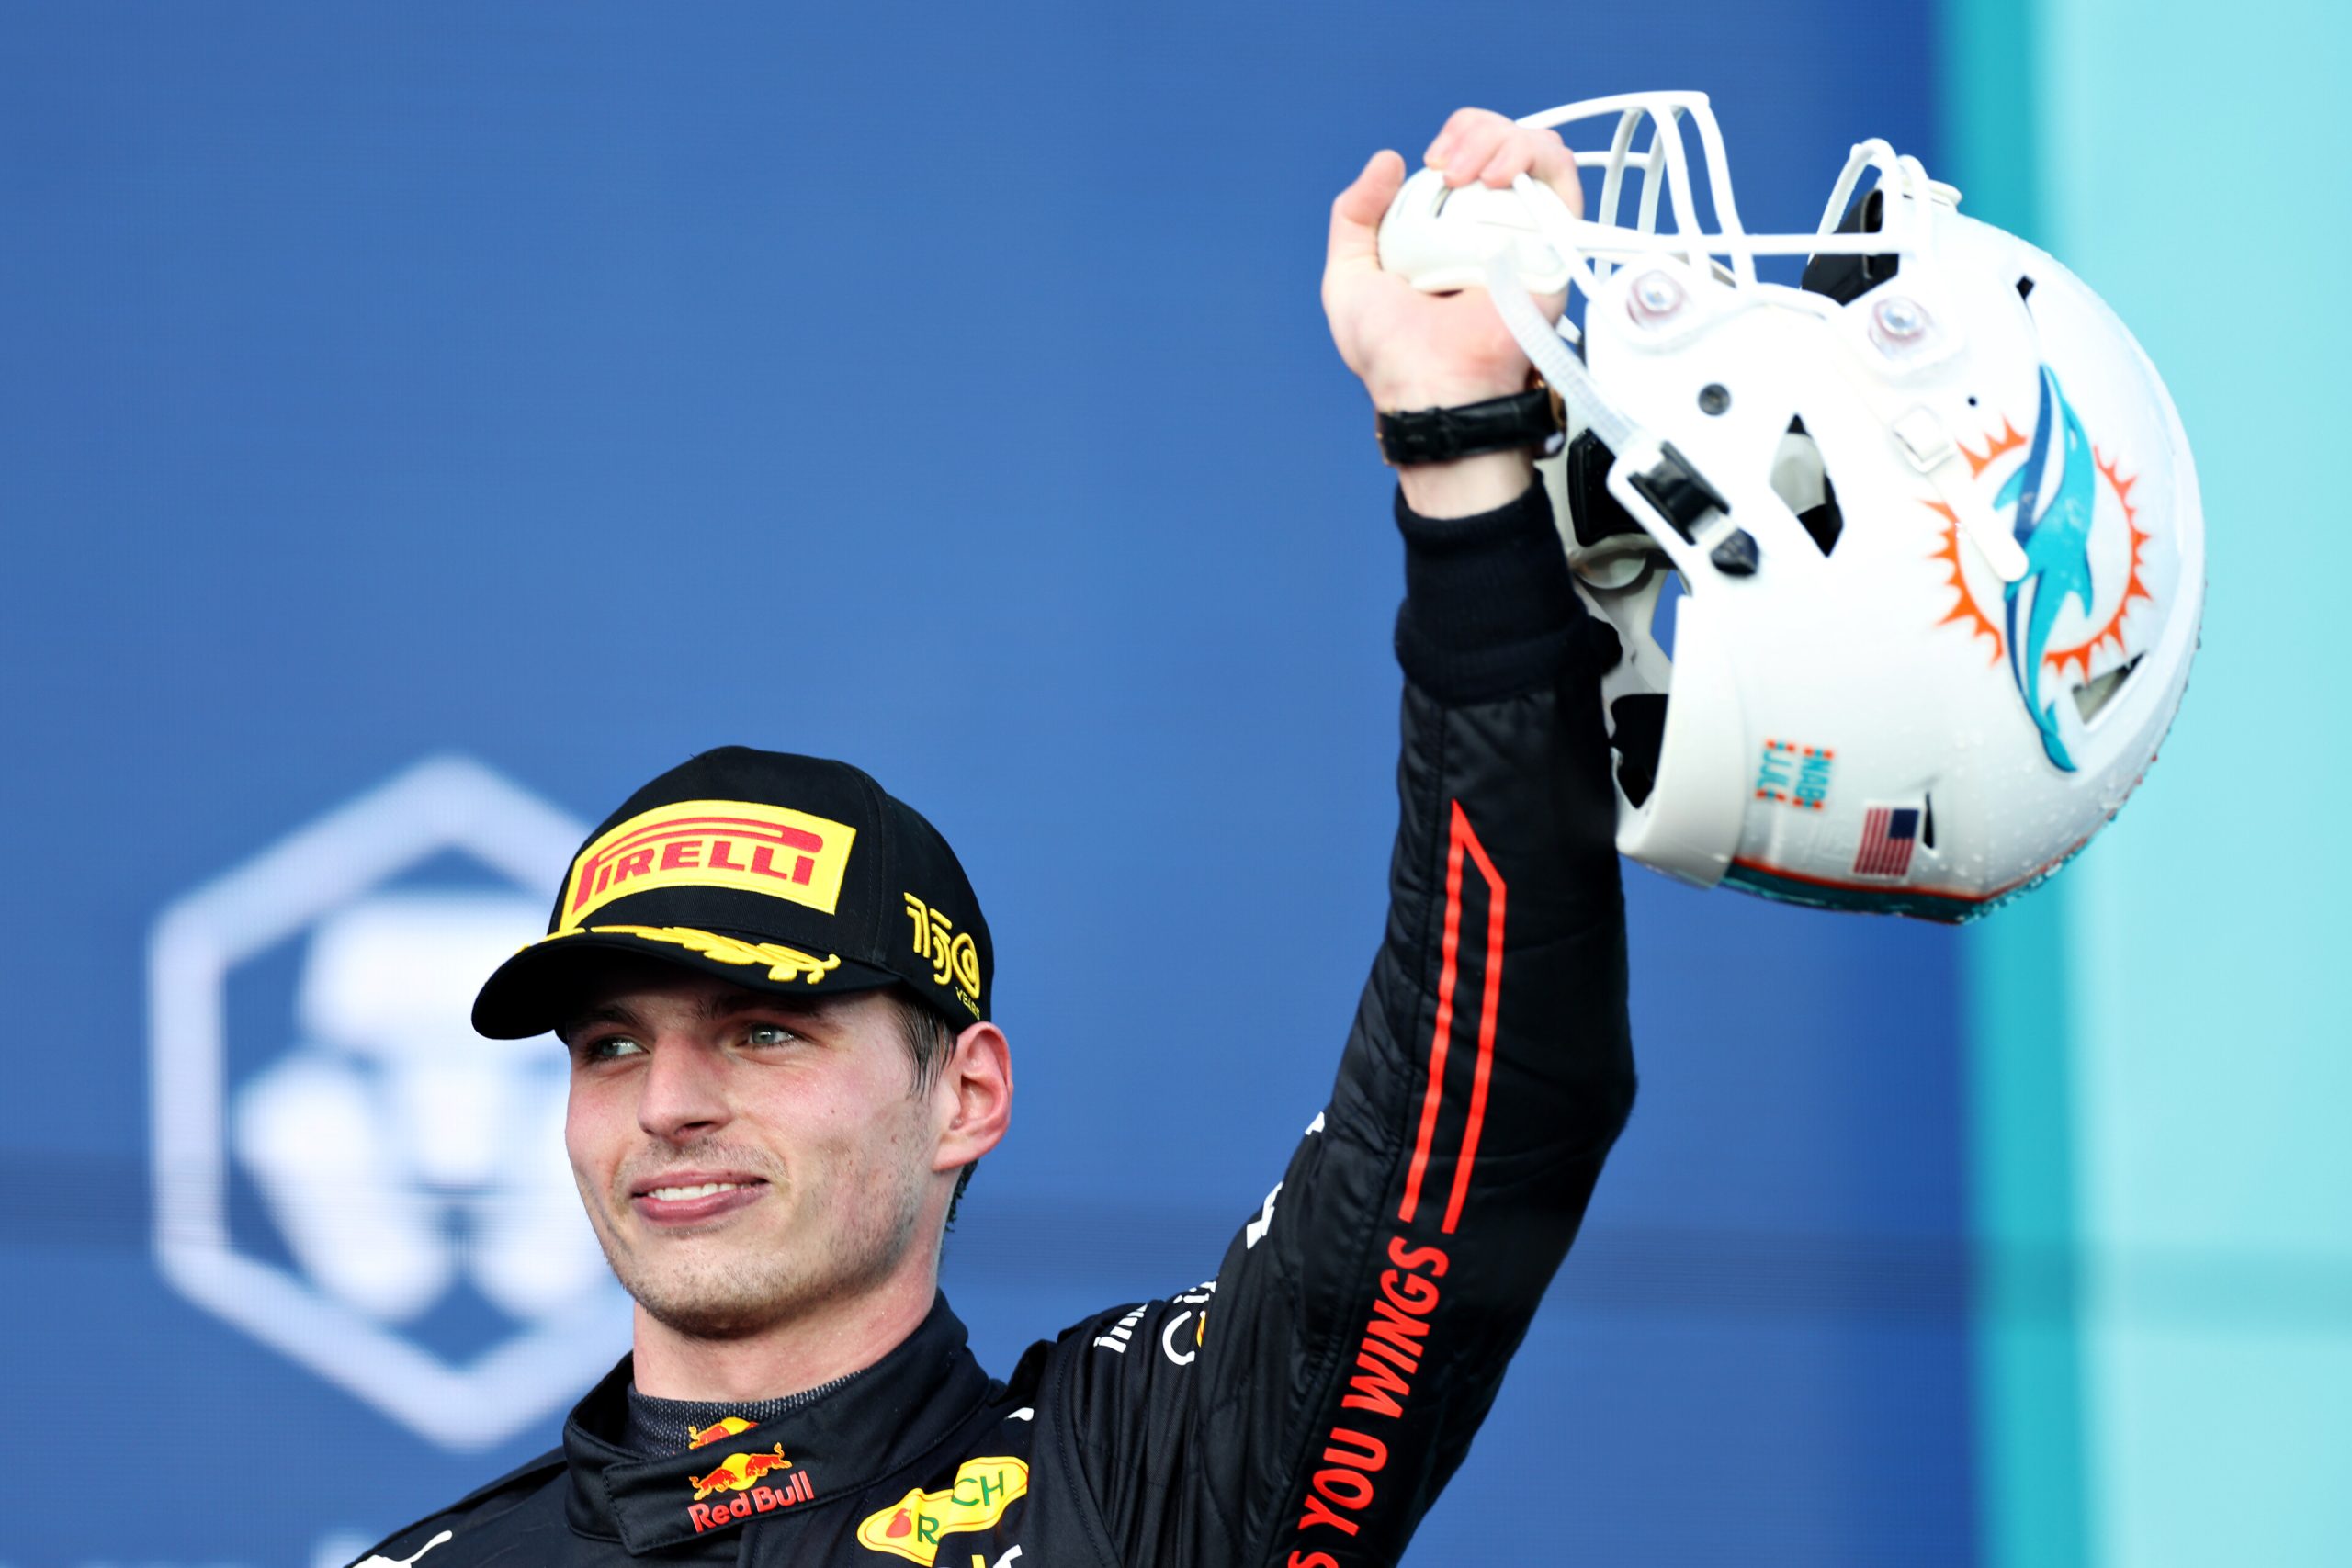 MIAMI, FLORIDA - MAY 08: Race winner Max Verstappen of the Netherlands and Oracle Red Bull Racing celebrates on the podium during the F1 Grand Prix of Miami at the Miami International Autodrome on May 08, 2022 in Miami, Florida. (Photo by Peter Fox/Getty Images) // Getty Images / Red Bull Content Pool // SI202205083103 // Usage for editorial use only //